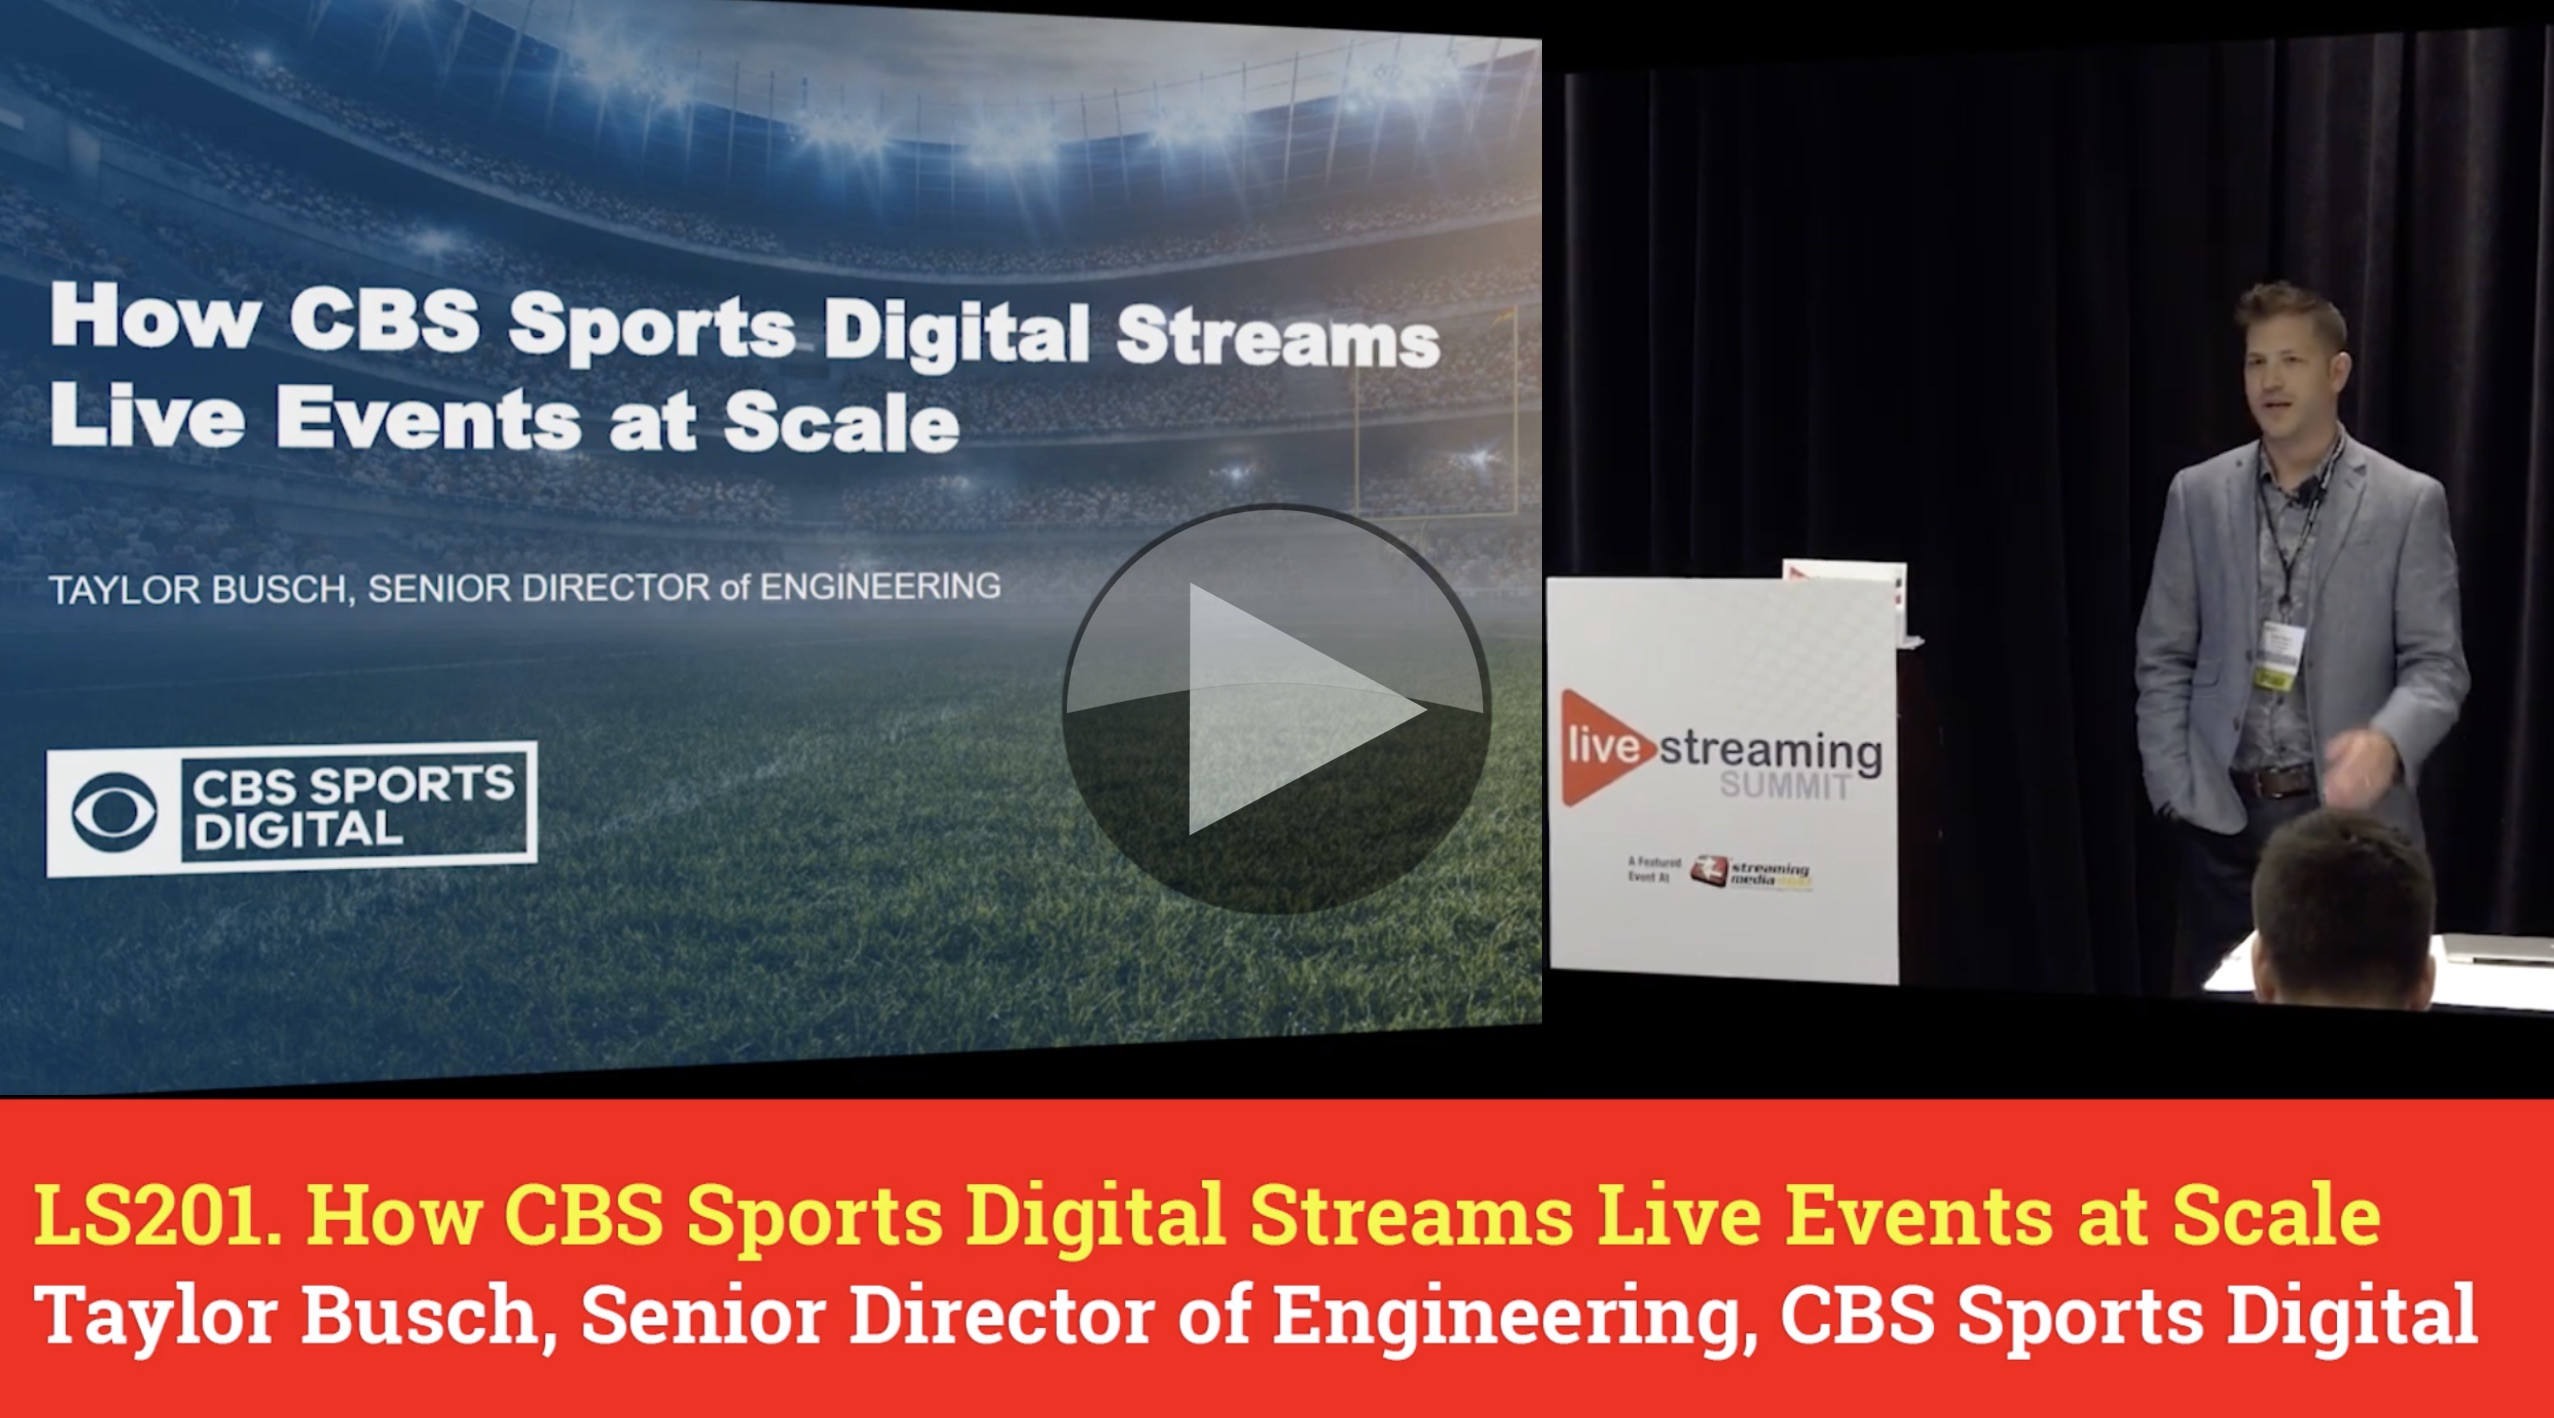 Video How CBS Sports Digital streams live events at scale